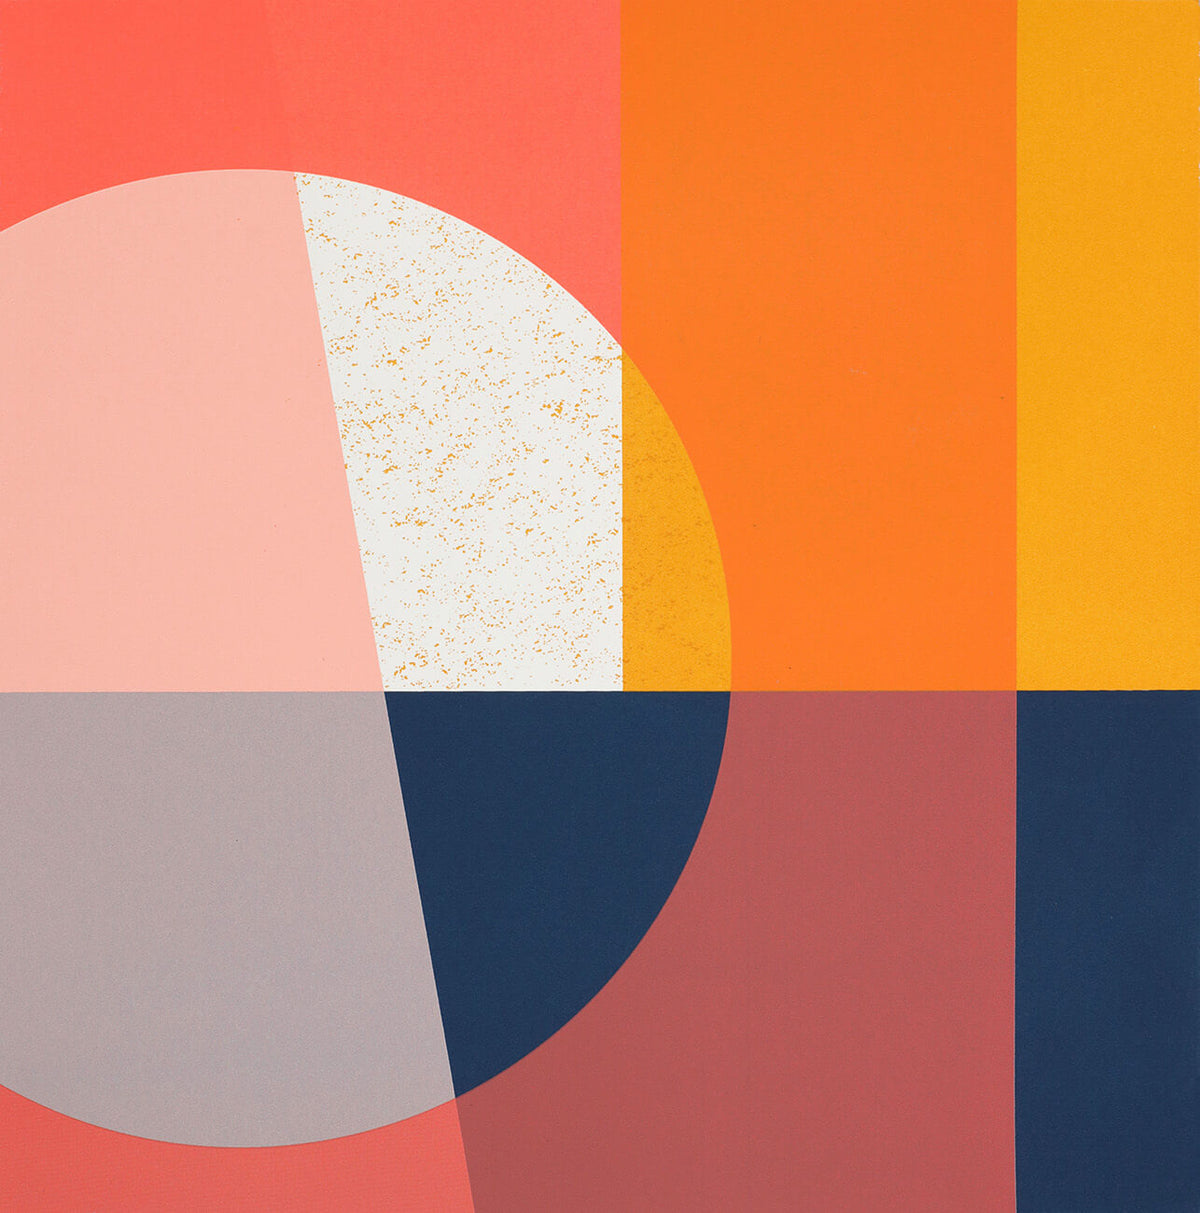 Abstract pop art screenprint with orange in a limited edition by Josie Blue Molloy